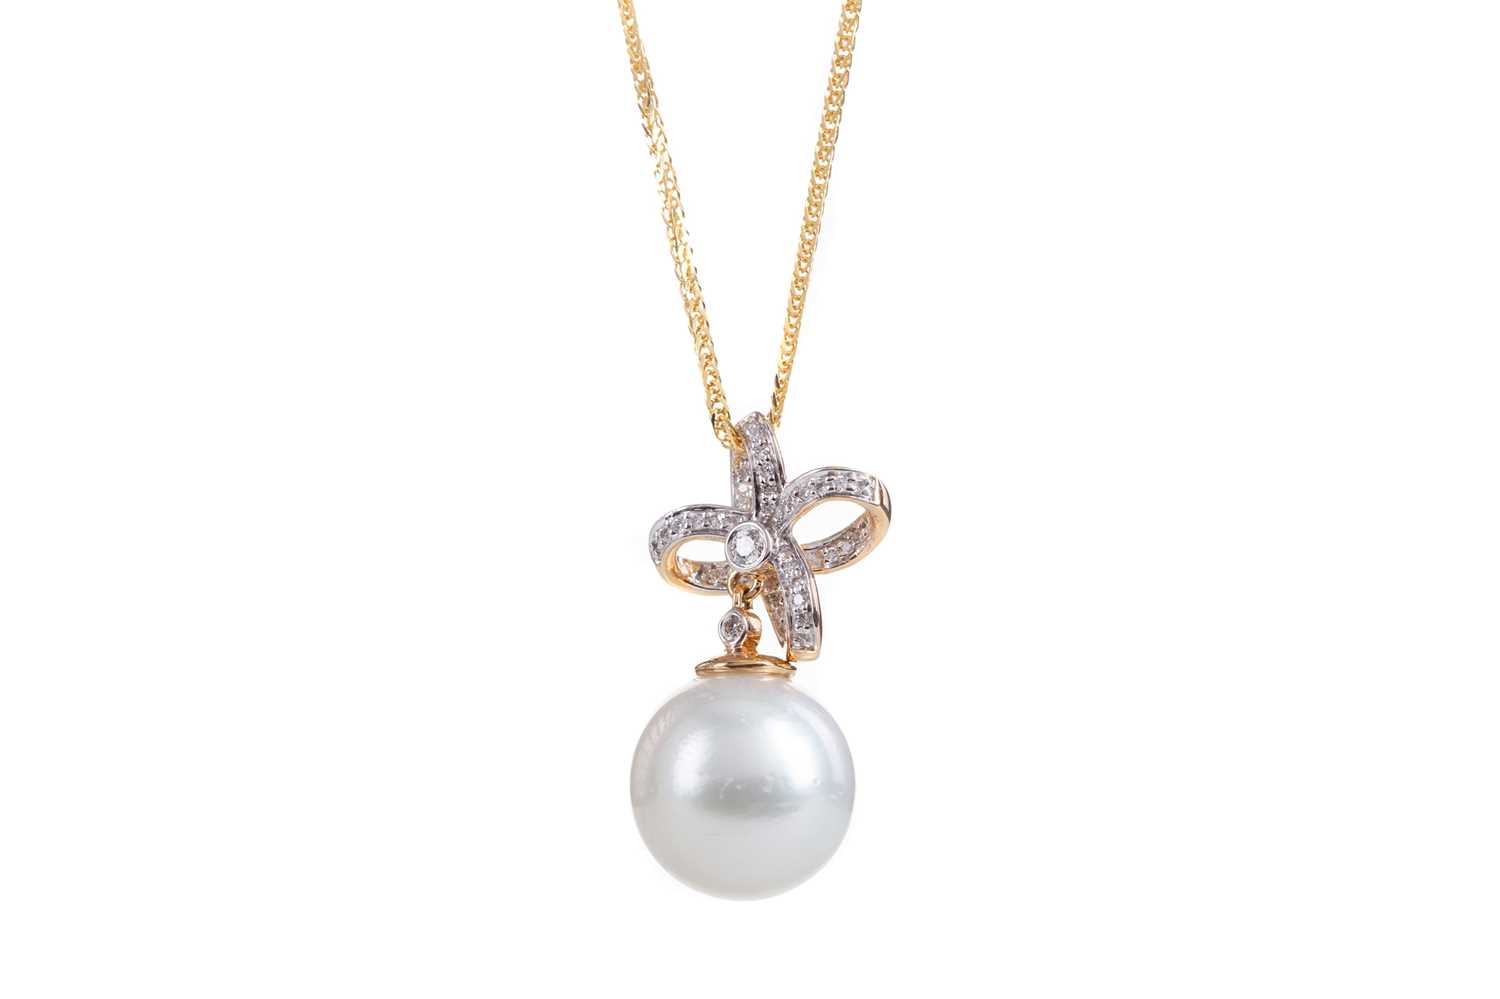 Lot 462 - A SOUTH SEA PEARL AND DIAMOND NECKLACE